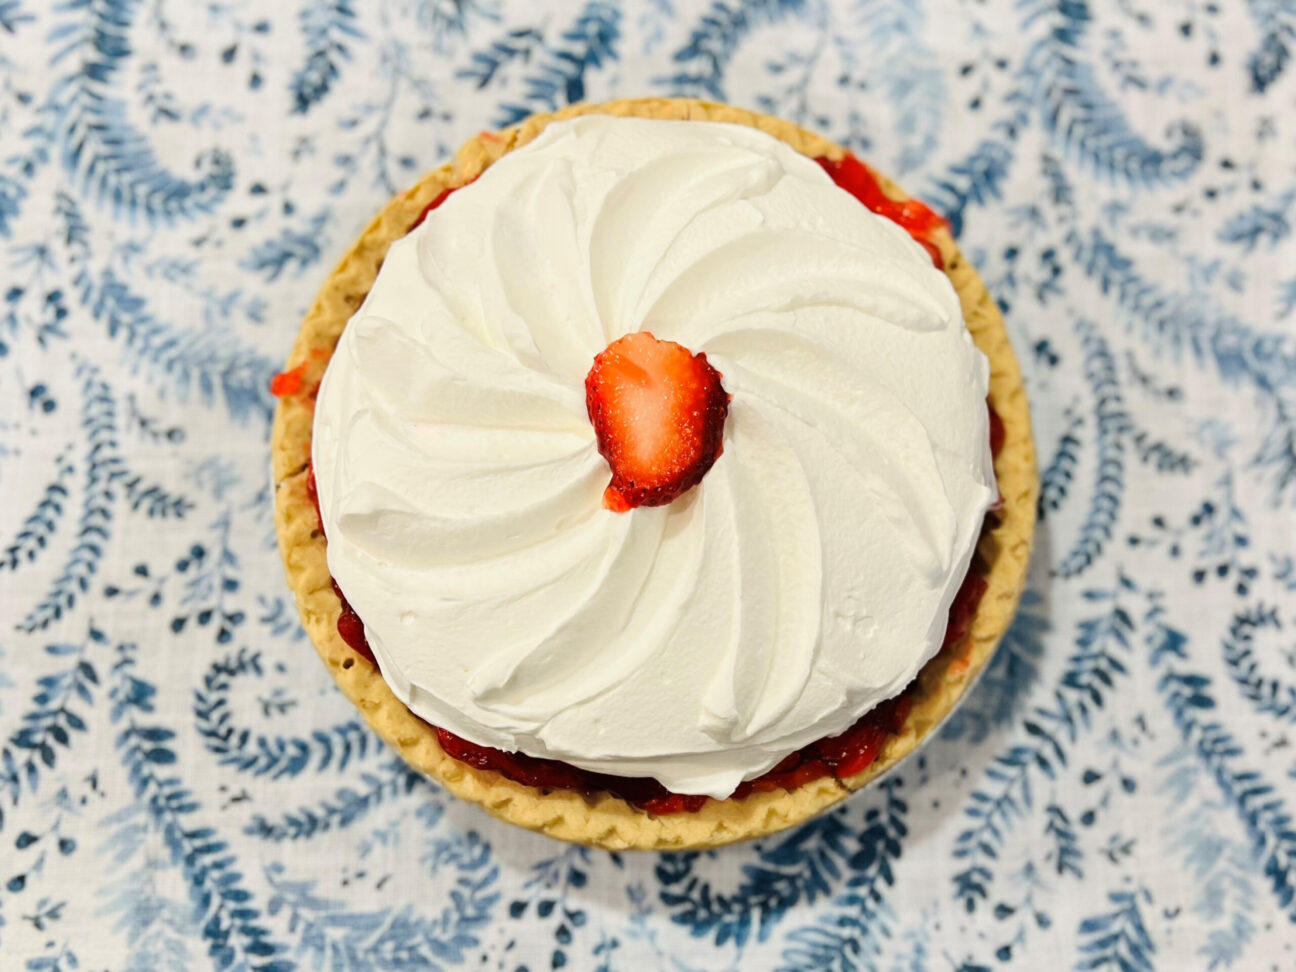 Strawberry pie on table